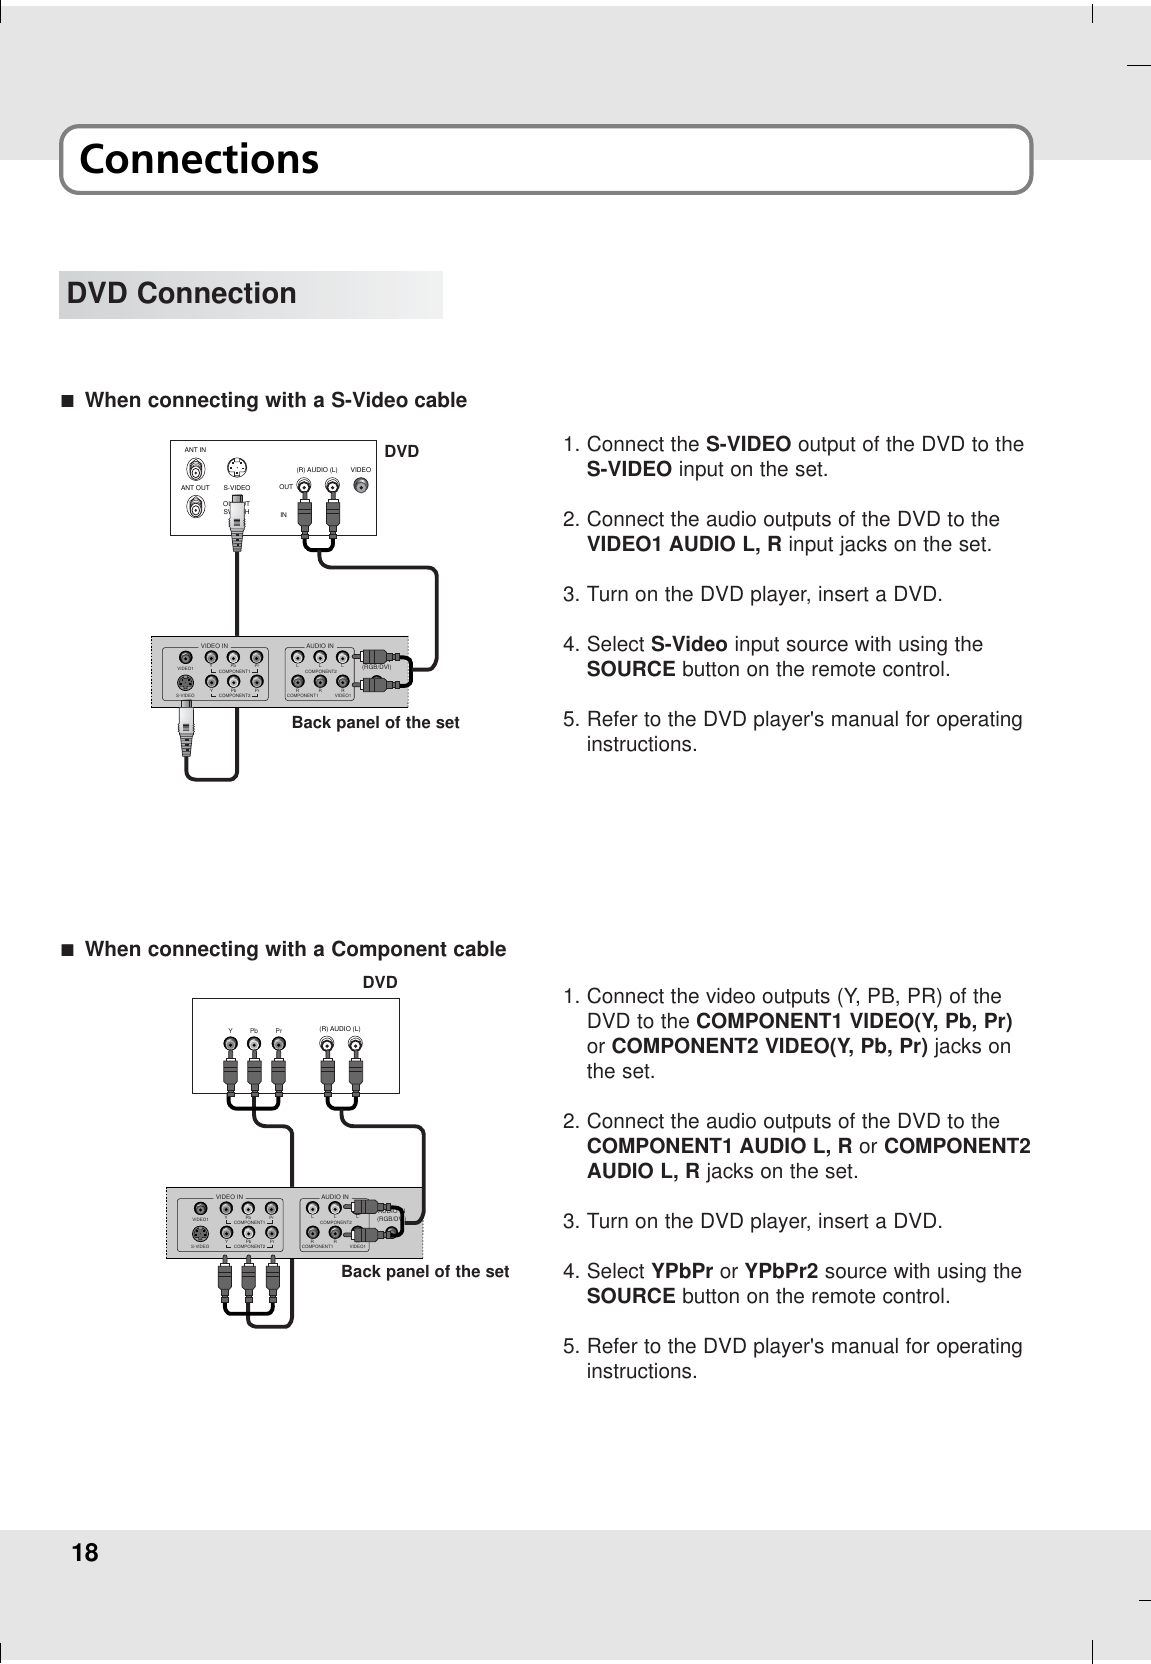 18ConnectionsDVD ConnectionANT INANT OUT S-VIDEOINOUT(R) AUDIO (L) VIDEOOUTPUTSWITCHAUDIO IN(RGB/DVI)COMPONENT2YPbPrYPbPrVIDEO INVIDEO1S-VIDEOCOMPONENT1L LR RCOMPONENT2VIDEO1RLAUDIO INCOMPONENT11. Connect the S-VIDEO output of the DVD to theS-VIDEO input on the set.2. Connect the audio outputs of the DVD to theVIDEO1 AUDIO L, R input jacks on the set.3. Turn on the DVD player, insert a DVD.4. Select S-Video input source with using theSOURCE button on the remote control.5. Refer to the DVD player&apos;s manual for operatinginstructions.AWhen connecting with a S-Video cableAUDIO IN(RGB/DVI)COMPONENT2YPbPrYPbPrVIDEO INVIDEO1S-VIDEOCOMPONENT1L LR RCOMPONENT2VIDEO1RLAUDIO INCOMPONENT1(R) AUDIO (L)YPb Pr1. Connect the video outputs (Y, PB, PR) of theDVD to the COMPONENT1 VIDEO(Y, Pb, Pr)or COMPONENT2 VIDEO(Y, Pb, Pr) jacks onthe set.2. Connect the audio outputs of the DVD to theCOMPONENT1 AUDIO L, R or COMPONENT2AUDIO L, R jacks on the set.3. Turn on the DVD player, insert a DVD.4. Select YPbPr or YPbPr2 source with using theSOURCE button on the remote control.5. Refer to the DVD player&apos;s manual for operatinginstructions.AWhen connecting with a Component cableDVDBack panel of the setDVDBack panel of the set